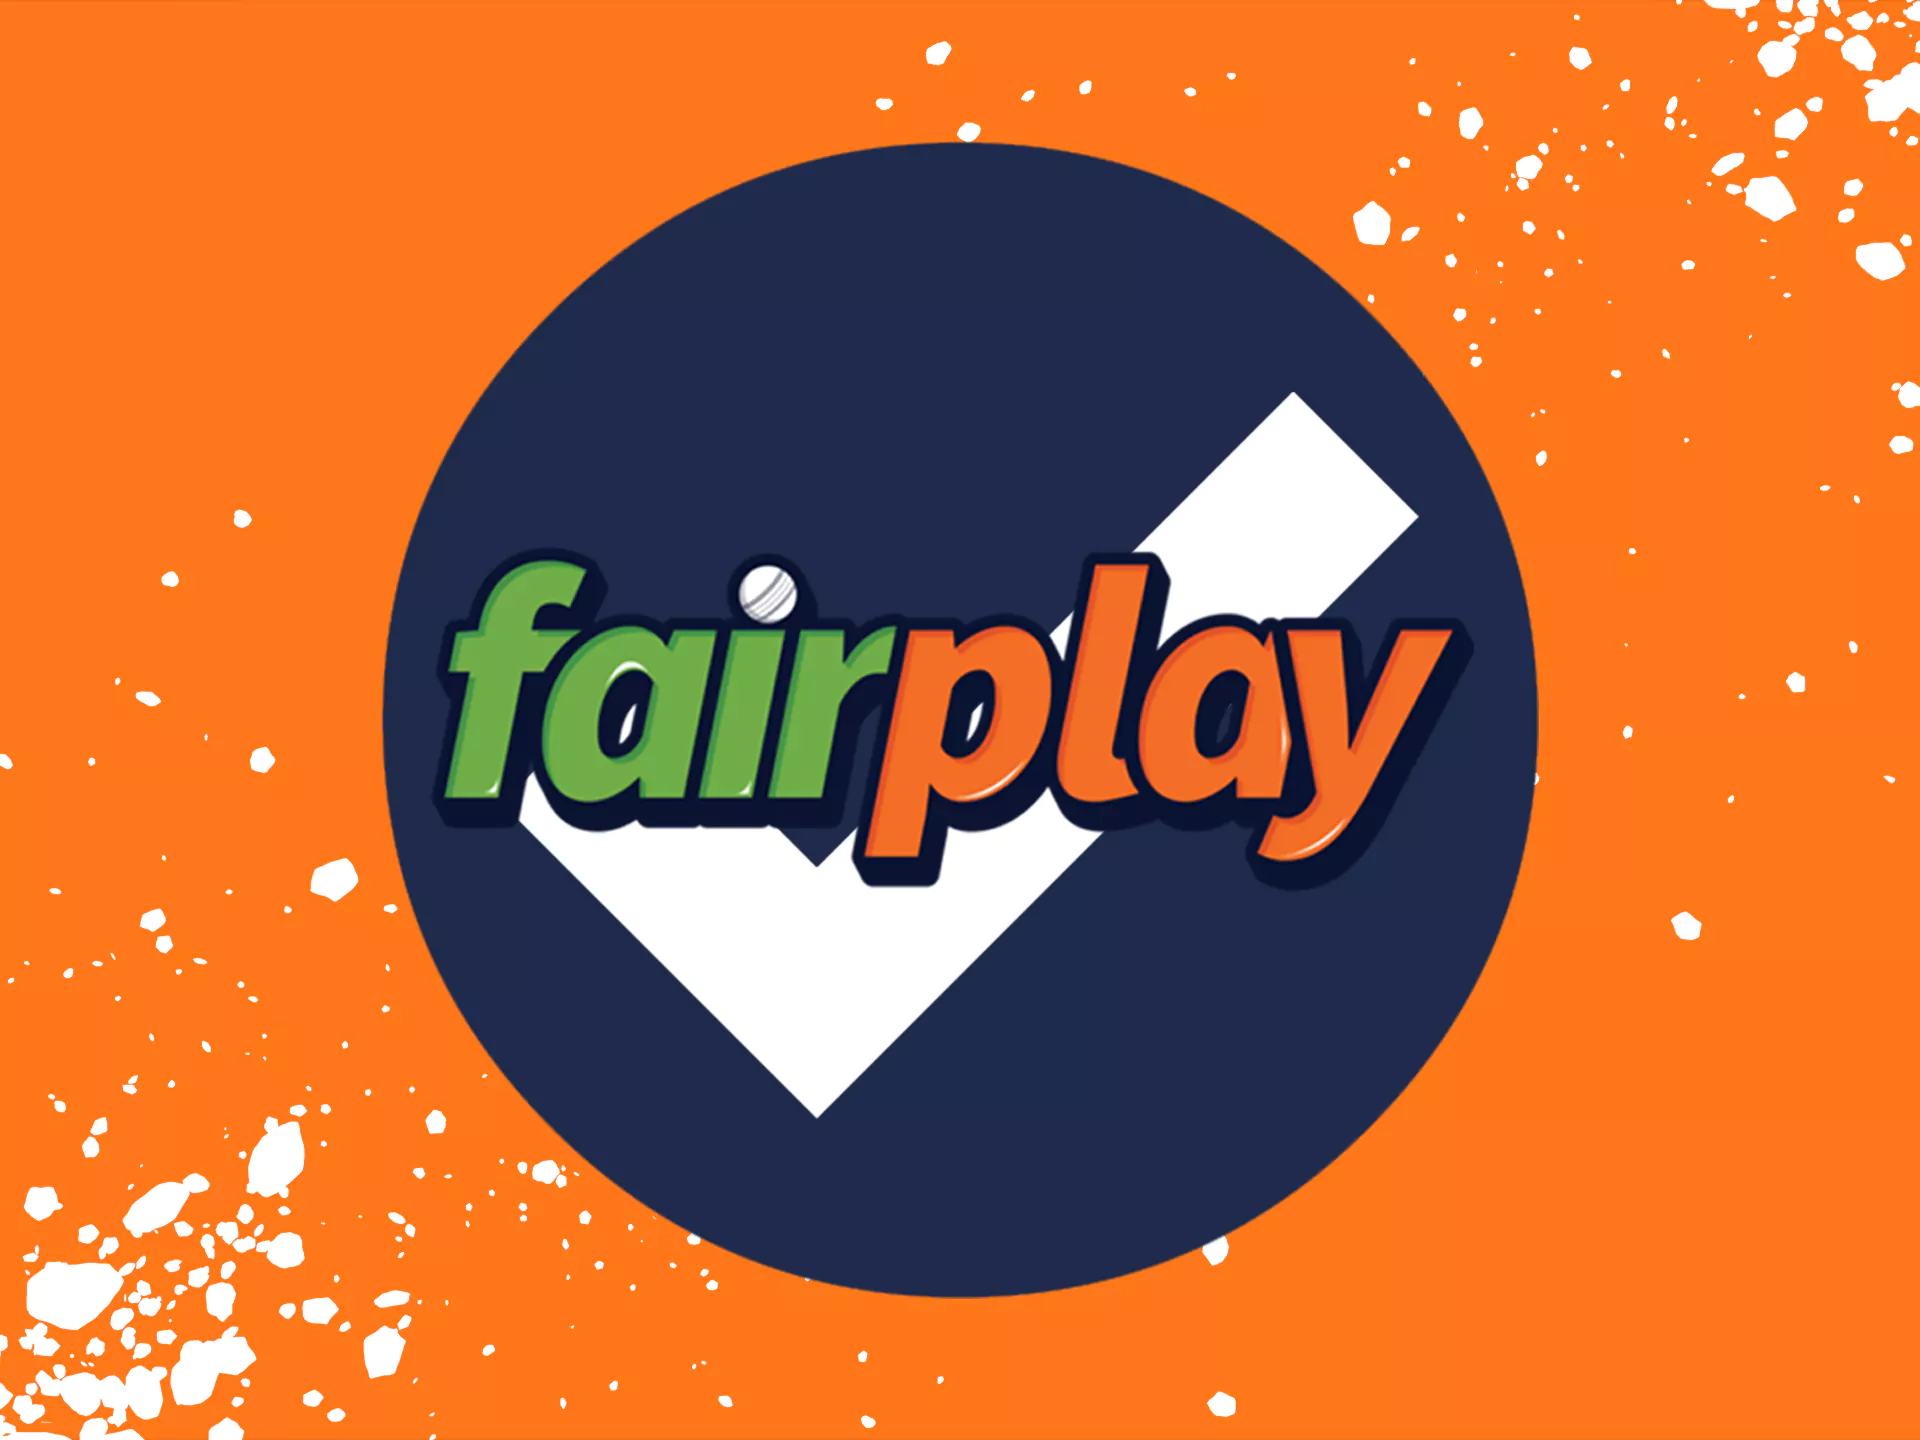 Verify your account at Fairplay.